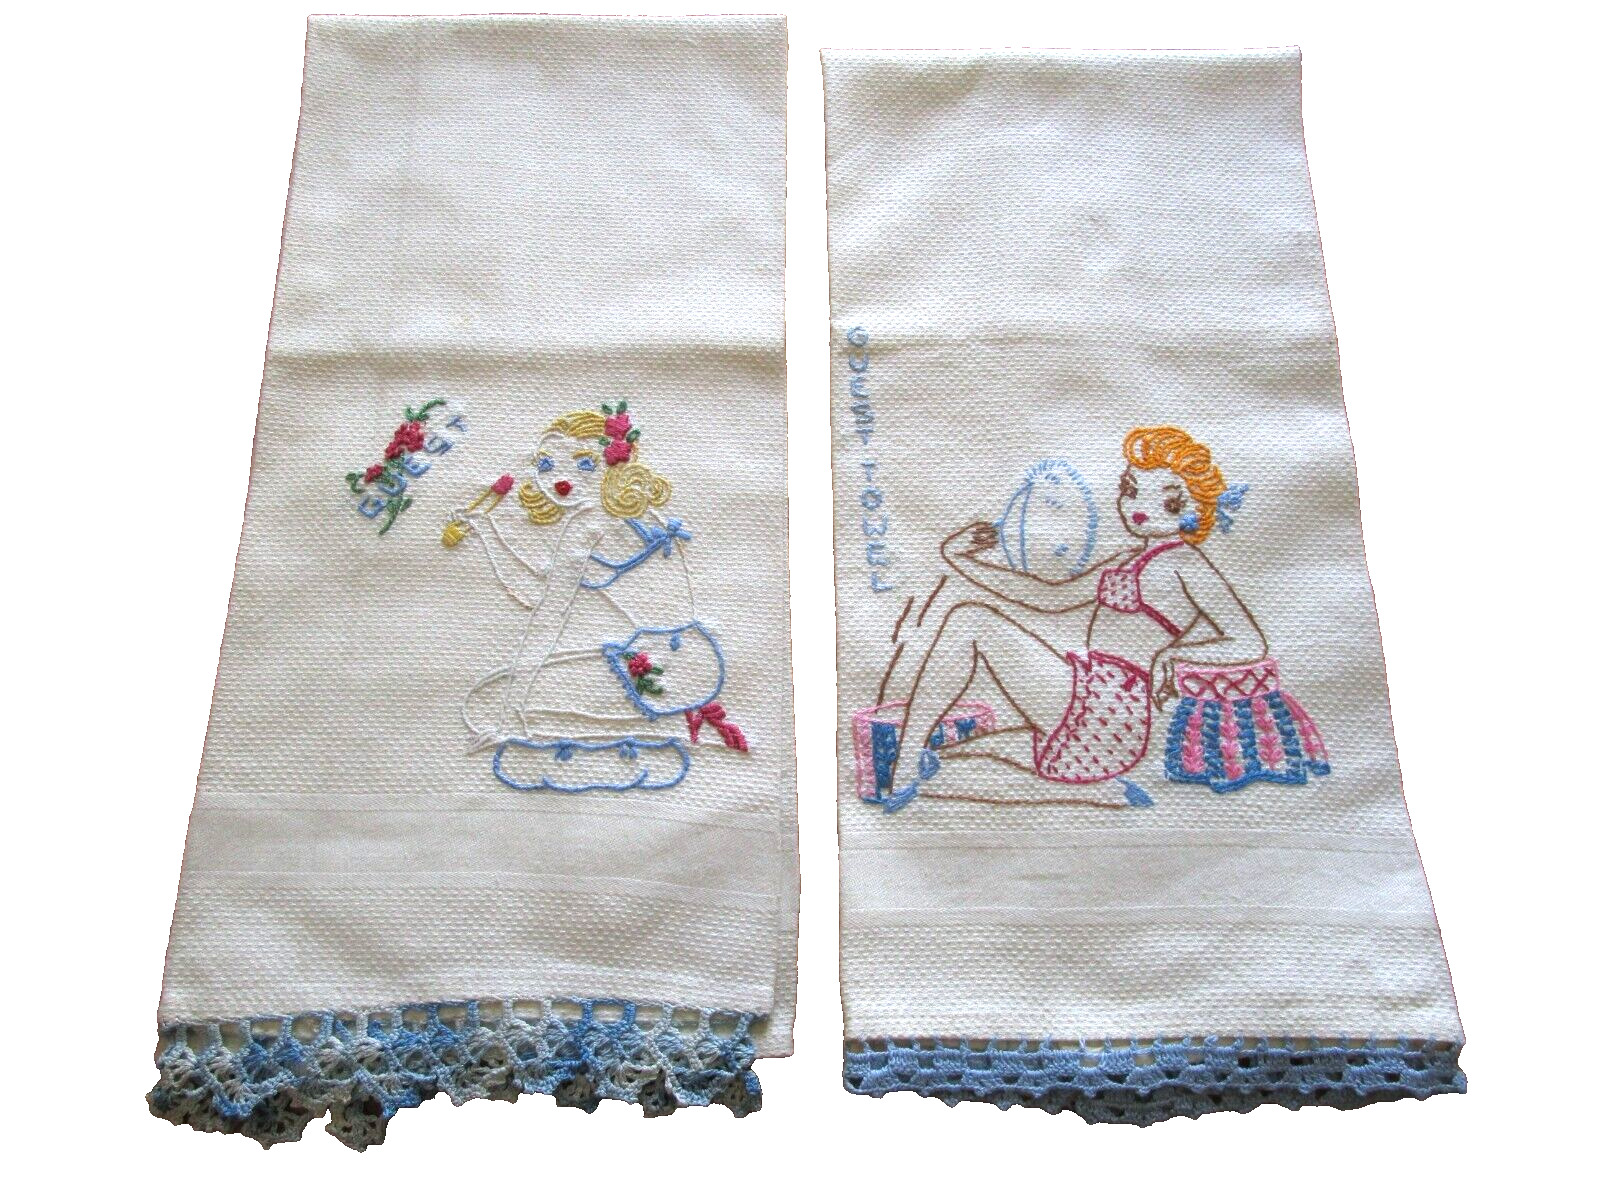 VINTAGE EMBROIDERED HUCK TOWELS GIRLS BATHING SUITS BLUE CROCHET EDGE